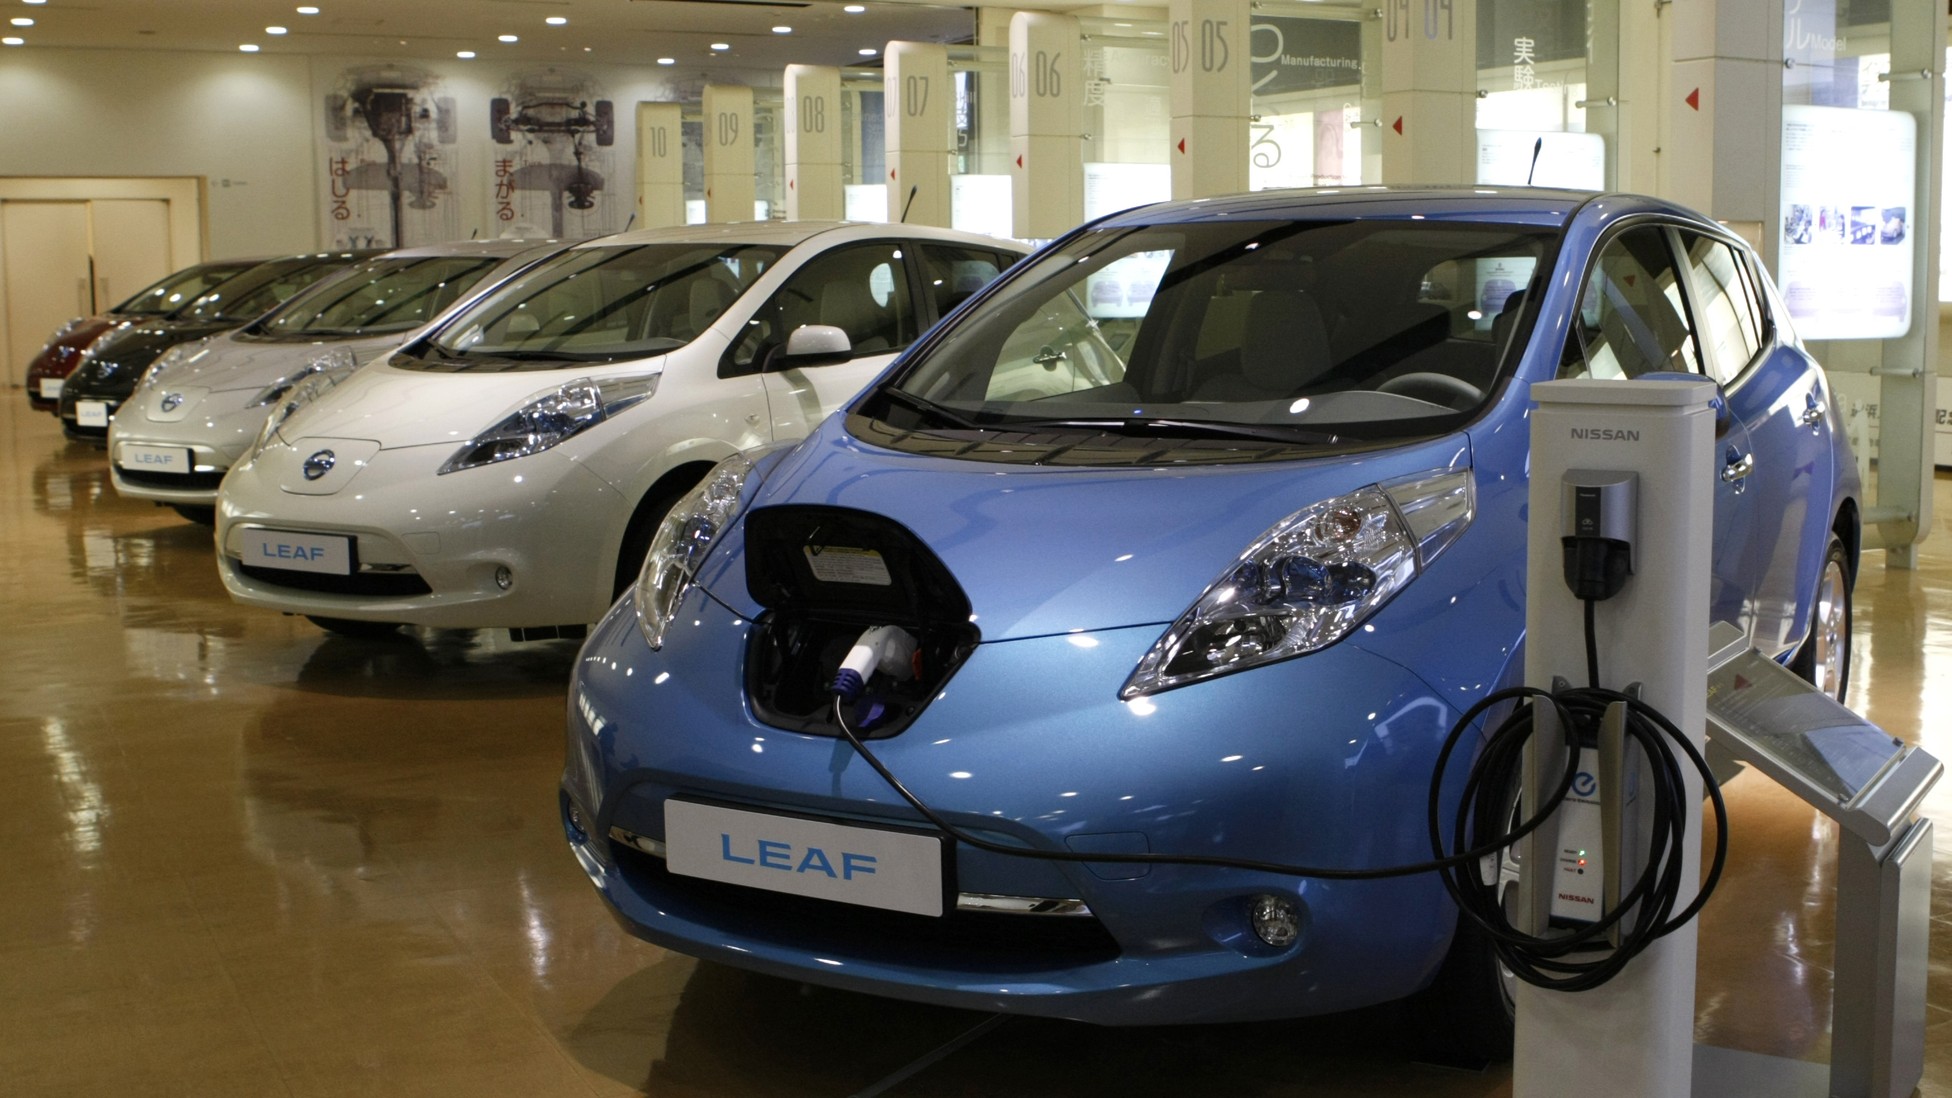 Saving the Driving an Electric Car Will Save Your Life